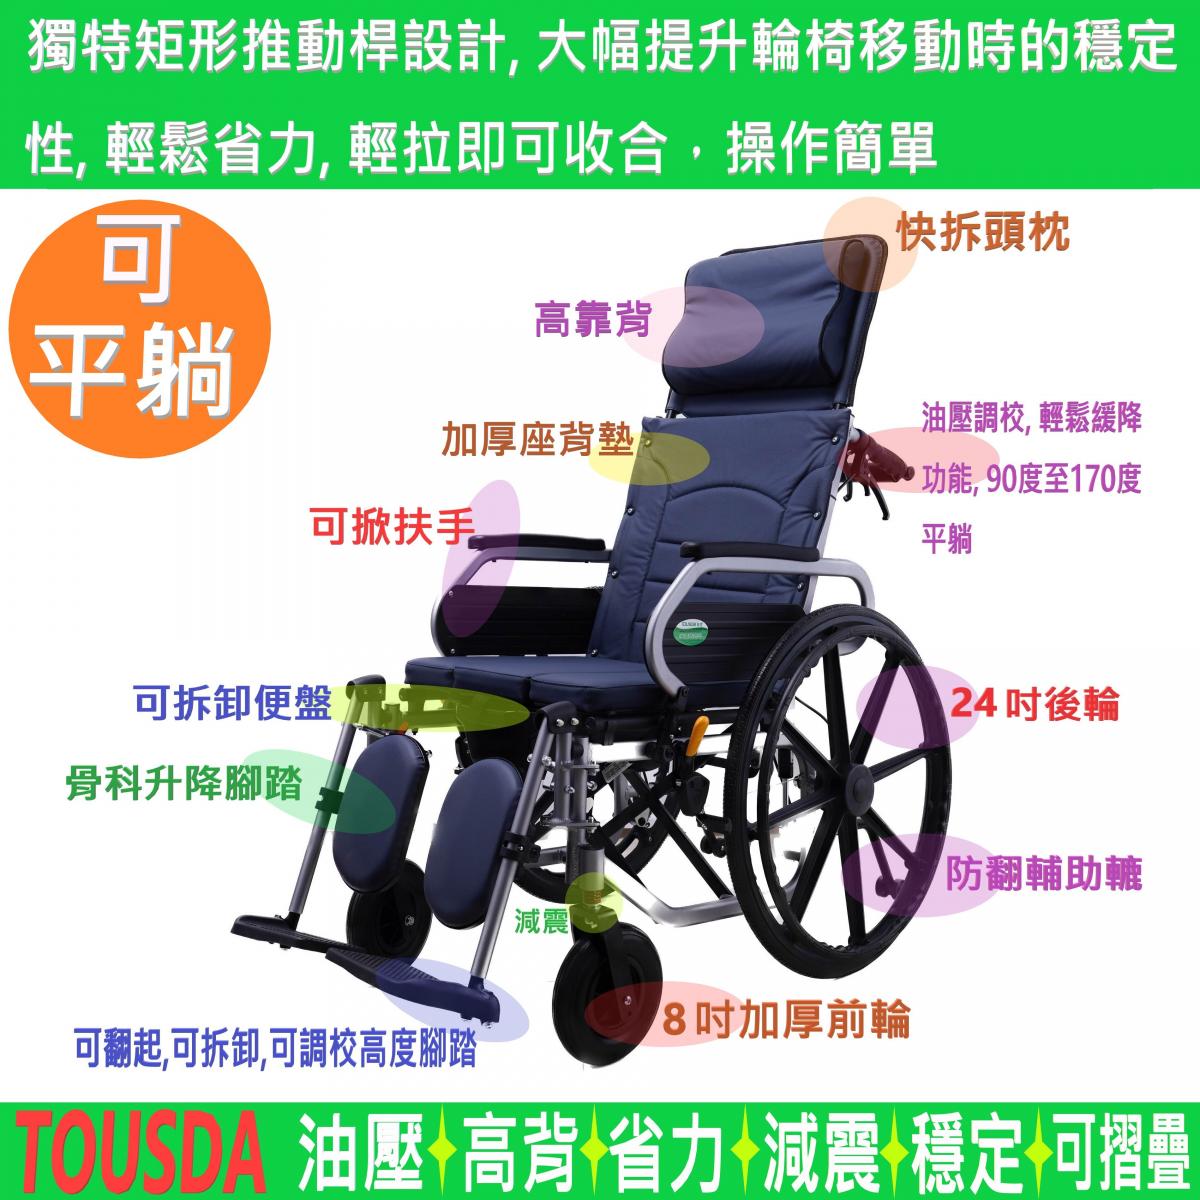 FHLT01BGCJ-24 - HYDRAULIC RECLINING COMMODE WHEELCHAIR (up to 170 degree from seat surface)